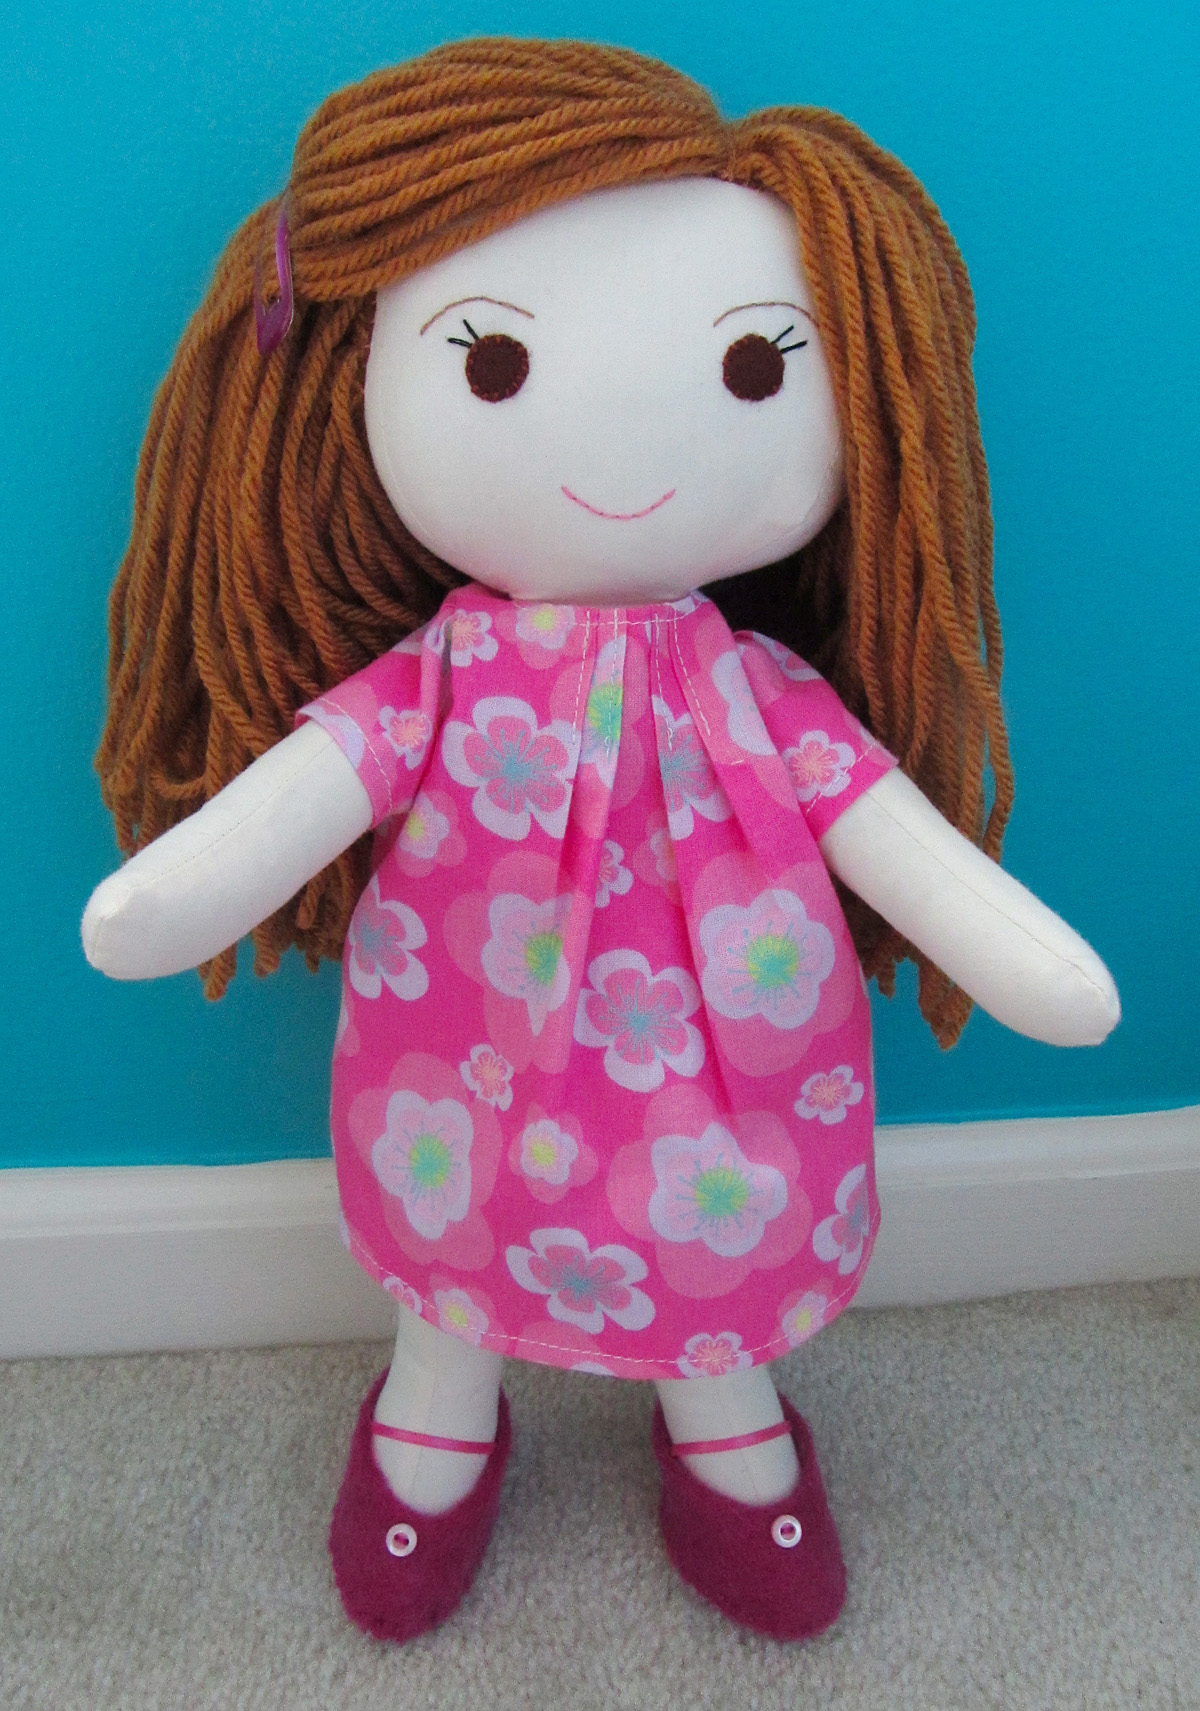 Rag Doll Patterns Printable | Search Results | New Calendar Template Site